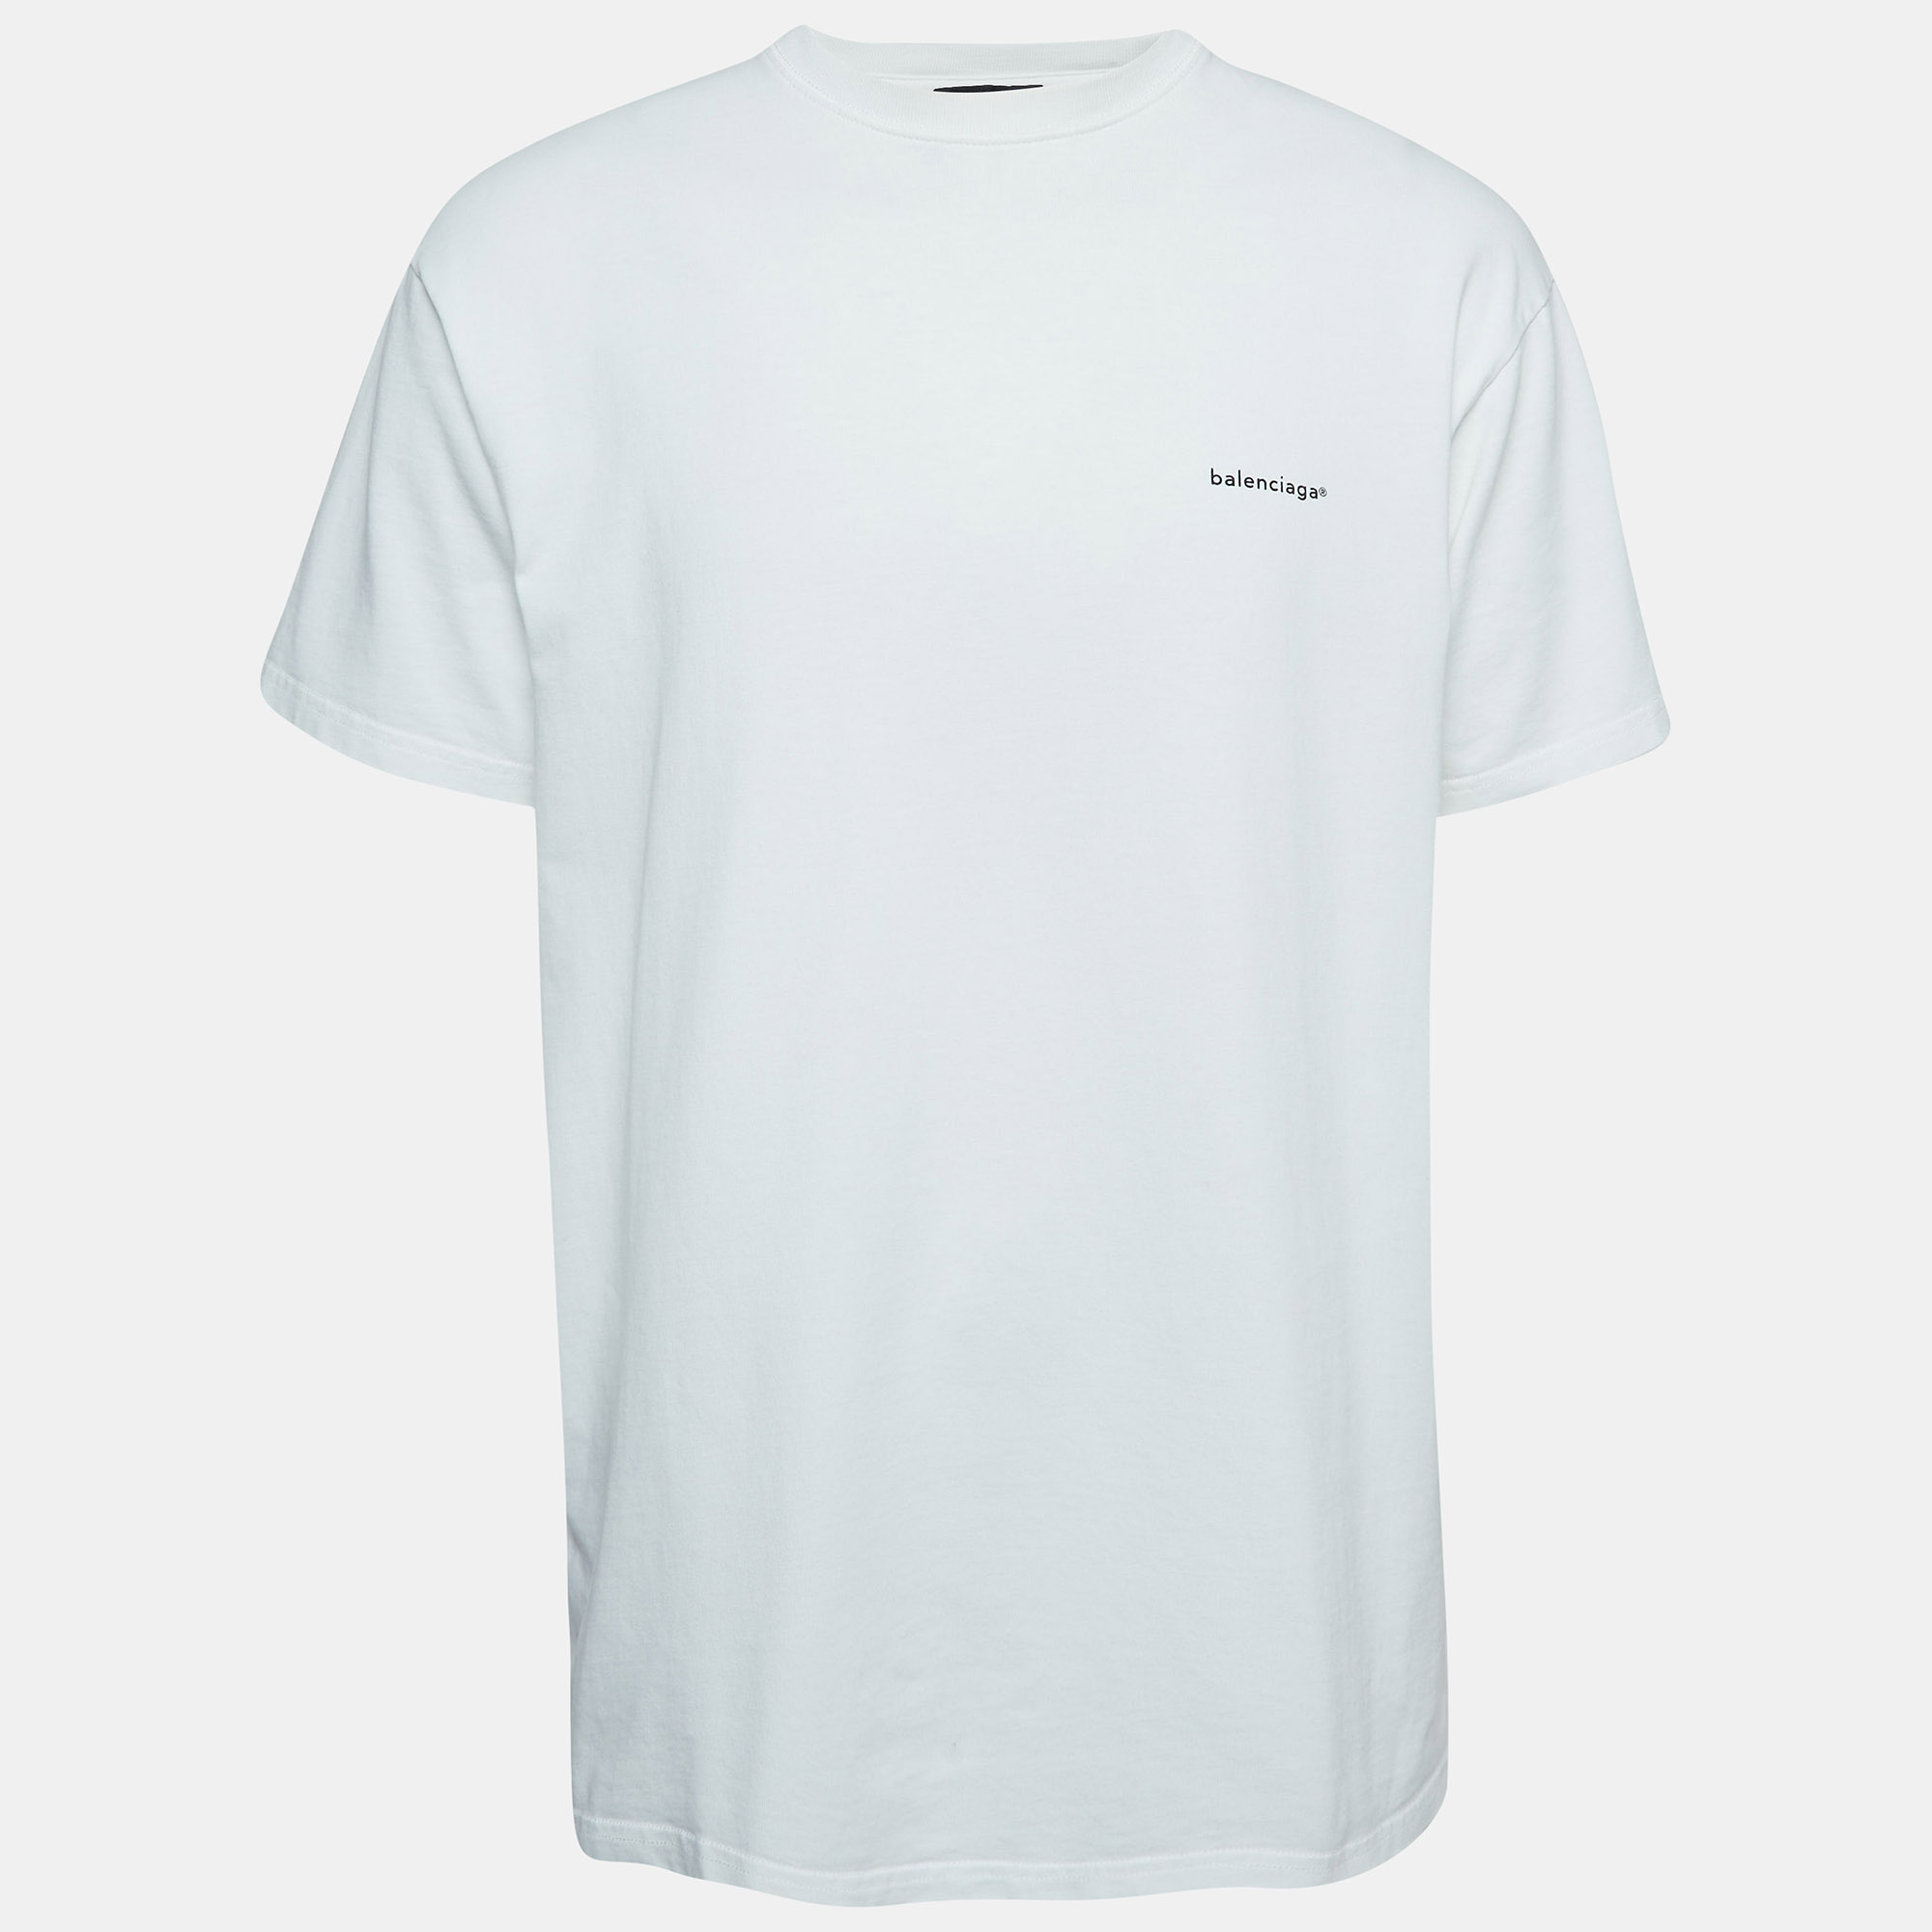 Whether you want to go out on casual outings with friends or just want to lounge around this t shirt is a versatile piece and can be styled in many ways. It has been made using fine fabric.